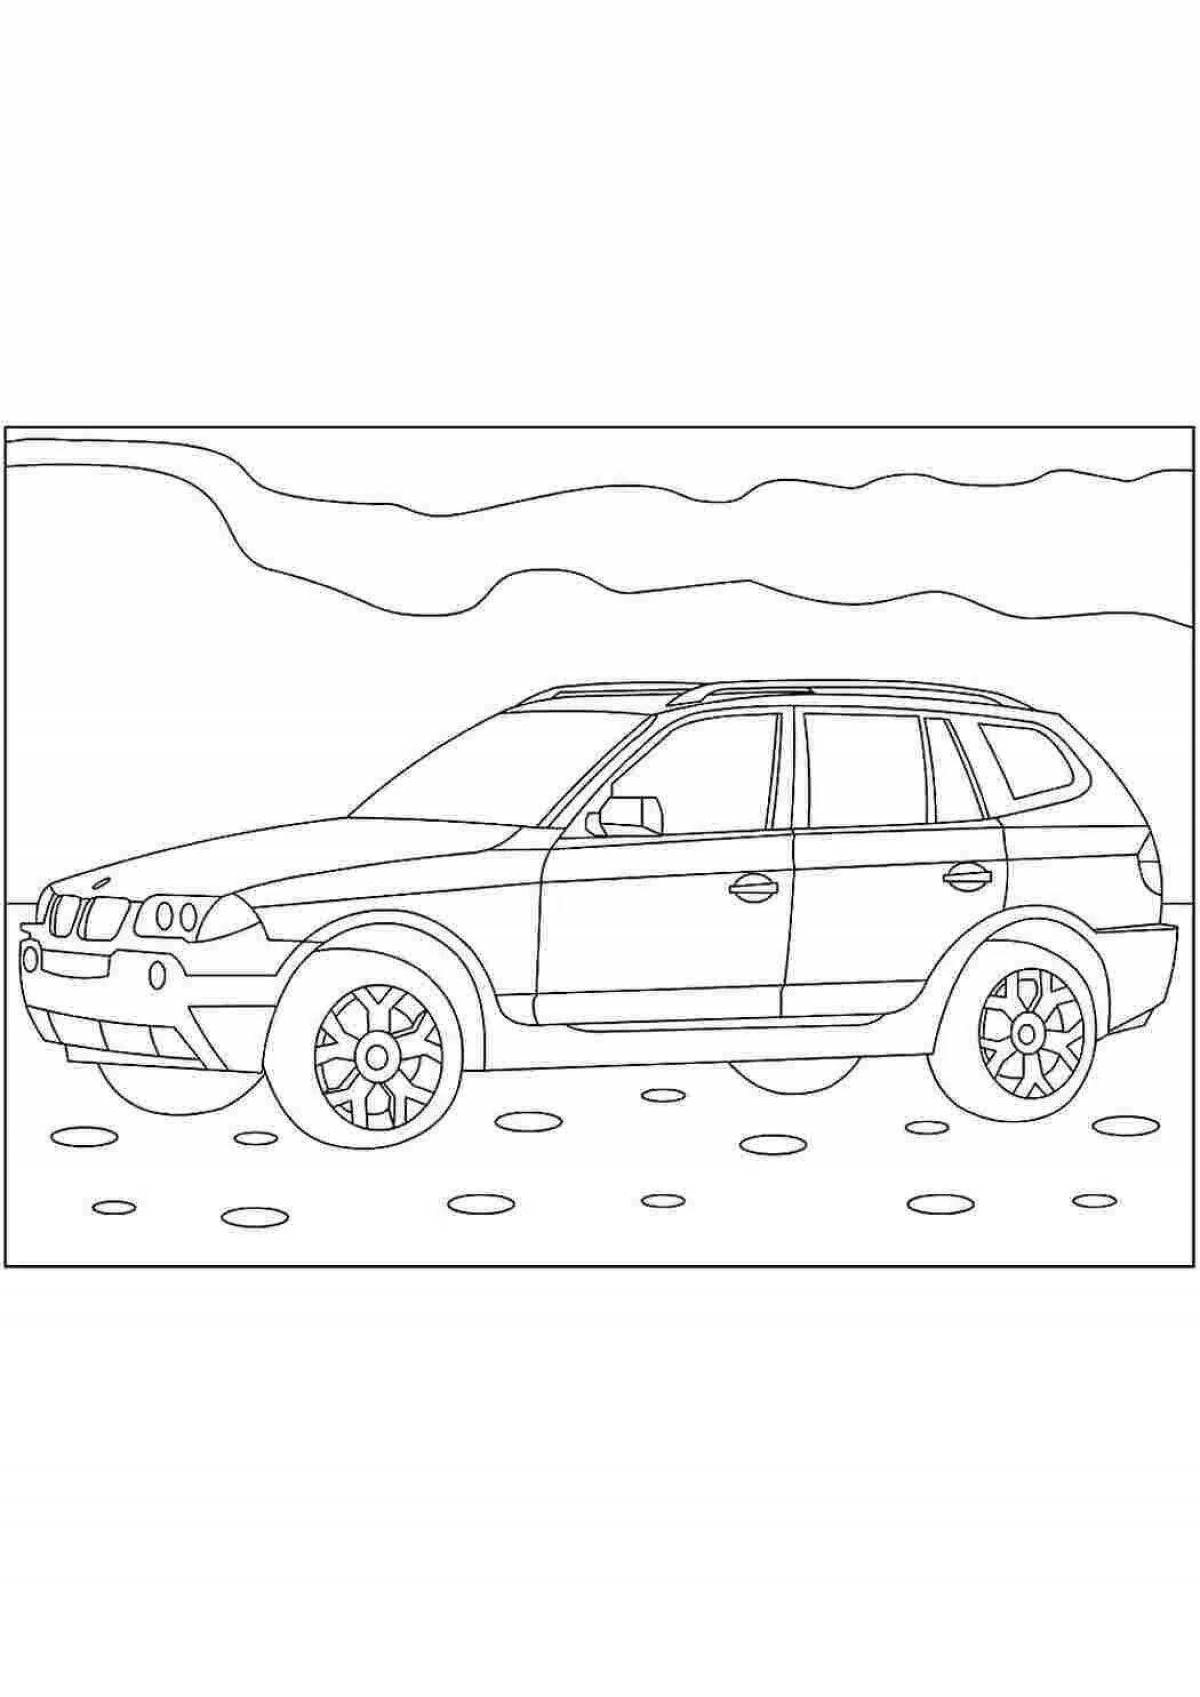 Coloring page unusual jeep bmw